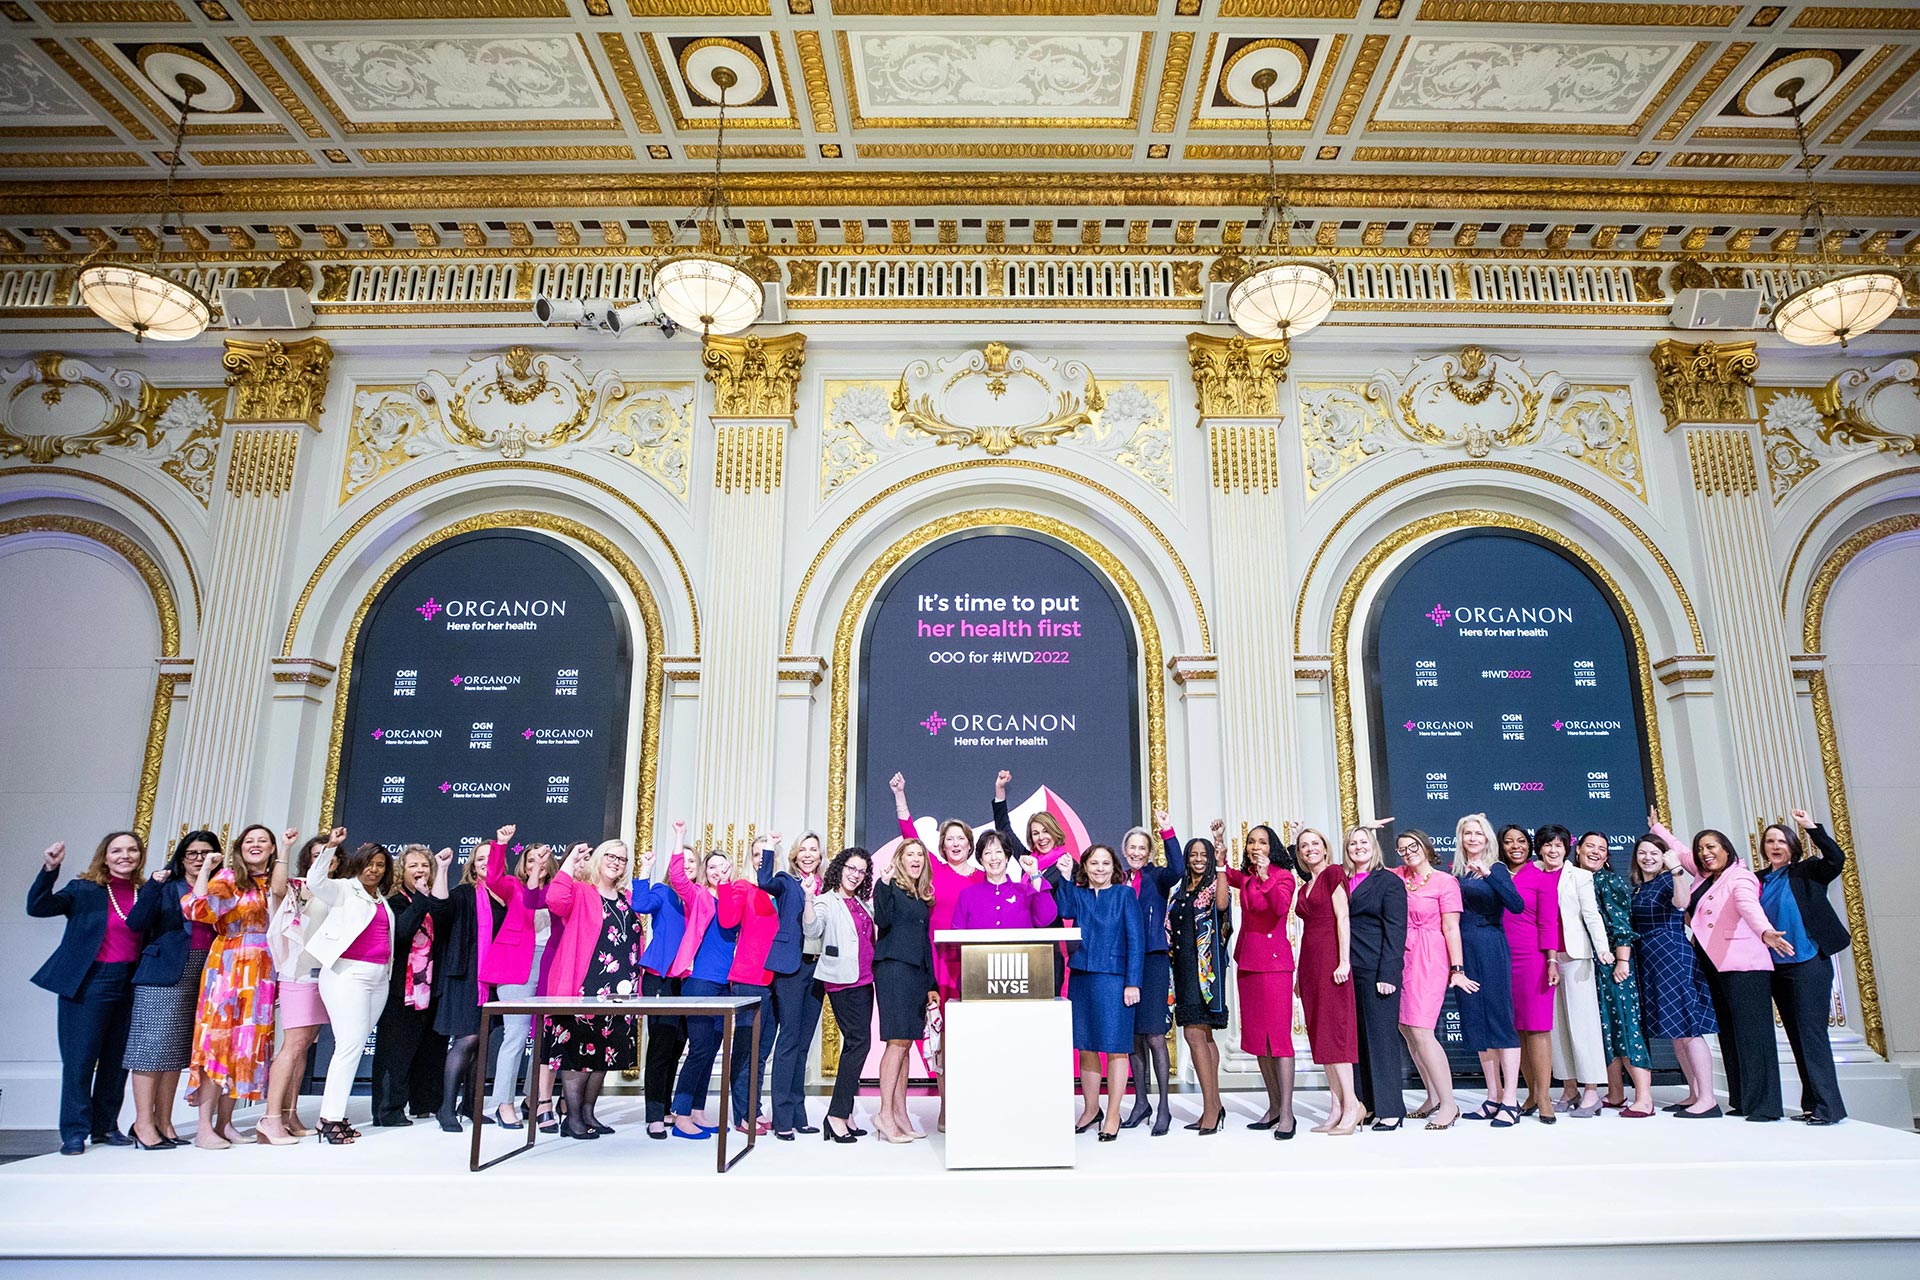 NYSE Women's History Month - 6